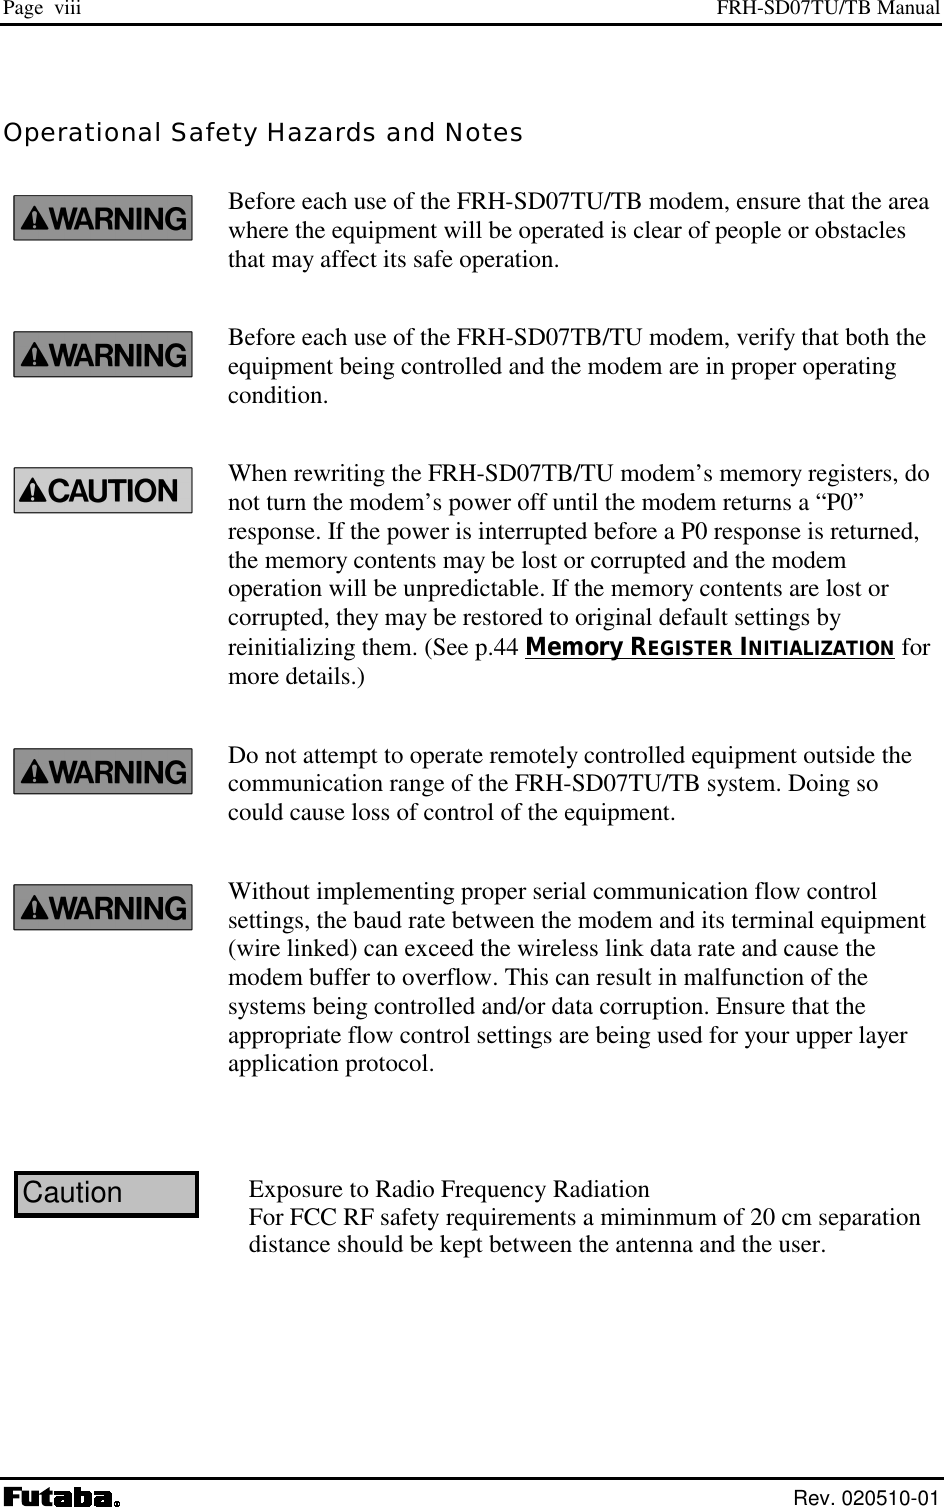 Page  viii  FRH-SD07TU/TB Manual  Rev. 020510-01 Operational Safety Hazards and Notes Before each use of the FRH-SD07TU/TB modem, ensure that the area where the equipment will be operated is clear of people or obstacles that may affect its safe operation. Before each use of the FRH-SD07TB/TU modem, verify that both the equipment being controlled and the modem are in proper operating condition. When rewriting the FRH-SD07TB/TU modem’s memory registers, do not turn the modem’s power off until the modem returns a “P0” response. If the power is interrupted before a P0 response is returned, the memory contents may be lost or corrupted and the modem operation will be unpredictable. If the memory contents are lost or corrupted, they may be restored to original default settings by reinitializing them. (See p.44 Memory REGISTER INITIALIZATION for more details.) Do not attempt to operate remotely controlled equipment outside the communication range of the FRH-SD07TU/TB system. Doing so could cause loss of control of the equipment. Without implementing proper serial communication flow control settings, the baud rate between the modem and its terminal equipment (wire linked) can exceed the wireless link data rate and cause the modem buffer to overflow. This can result in malfunction of the systems being controlled and/or data corruption. Ensure that the appropriate flow control settings are being used for your upper layer application protocol. CautionExposure to Radio Frequency RadiationFor FCC RF safety requirements a miminmum of 20 cm separation distance should be kept between the antenna and the user.